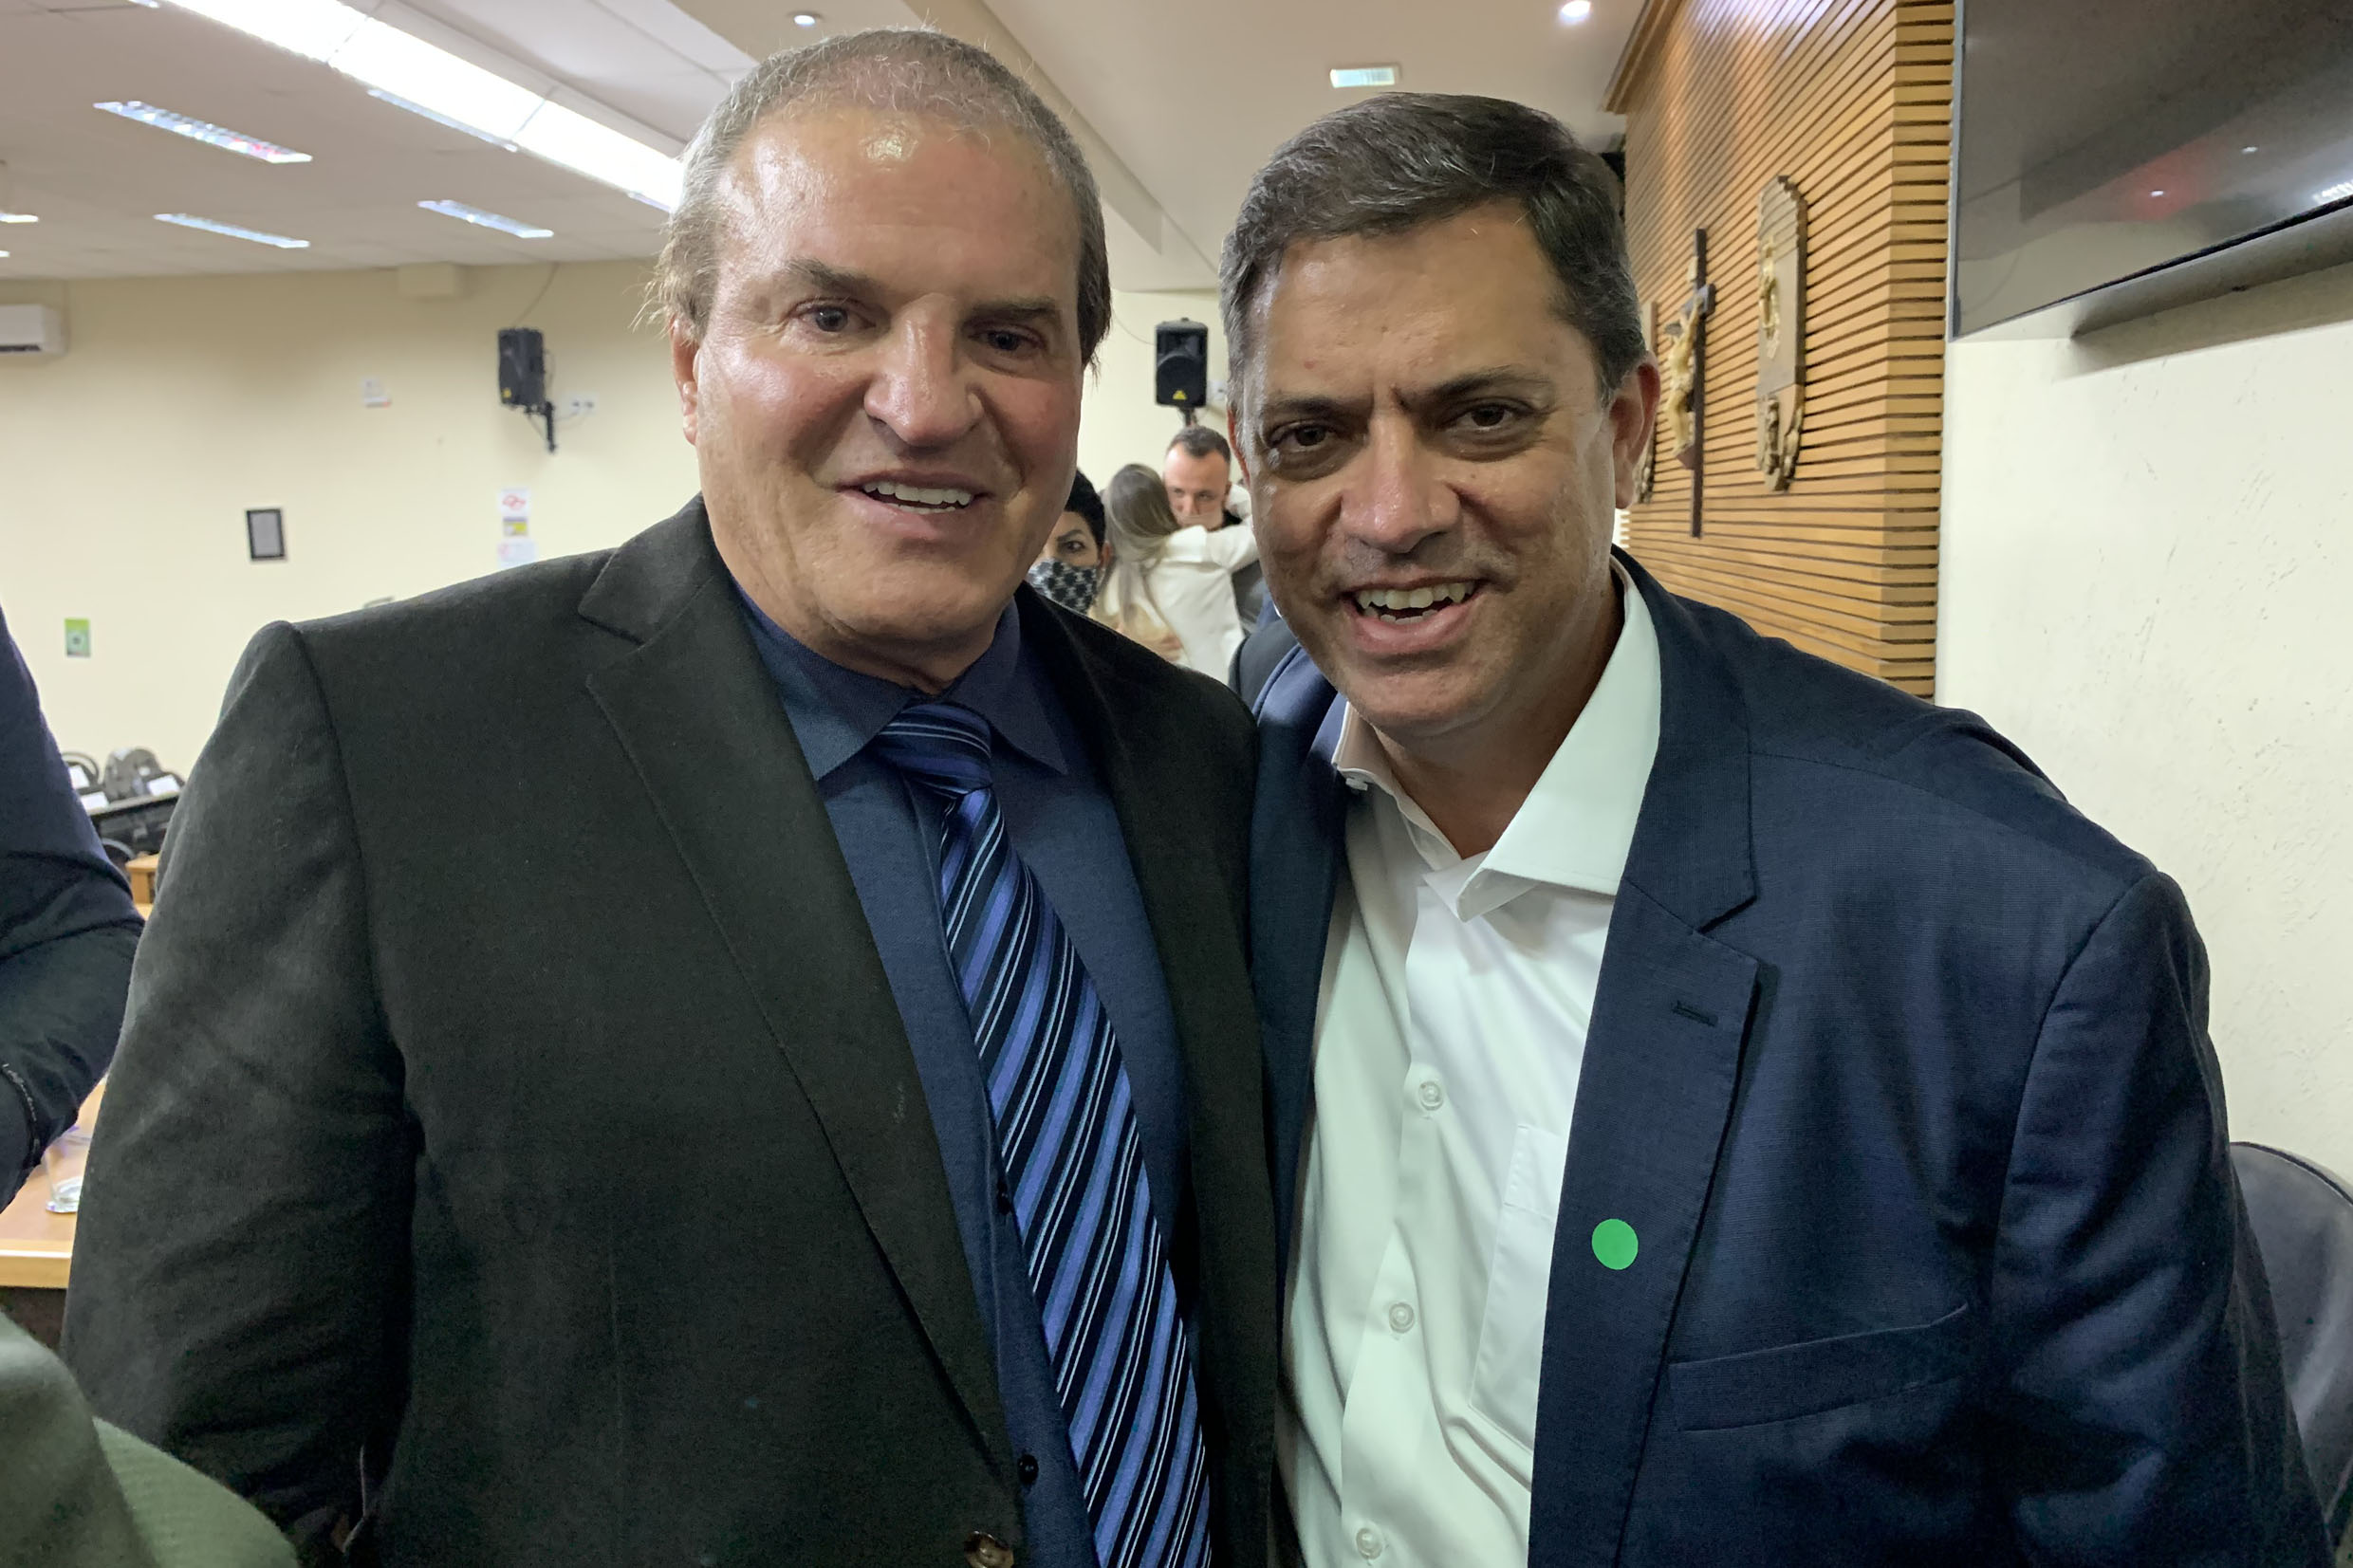 Cezar e Marcos Neves<a style='float:right' href='https://www3.al.sp.gov.br/repositorio/noticia/N-03-2022/fg283382.jpg' target=_blank><img src='/_img/material-file-download-white.png' width='14px' alt='Clique para baixar a imagem'></a>